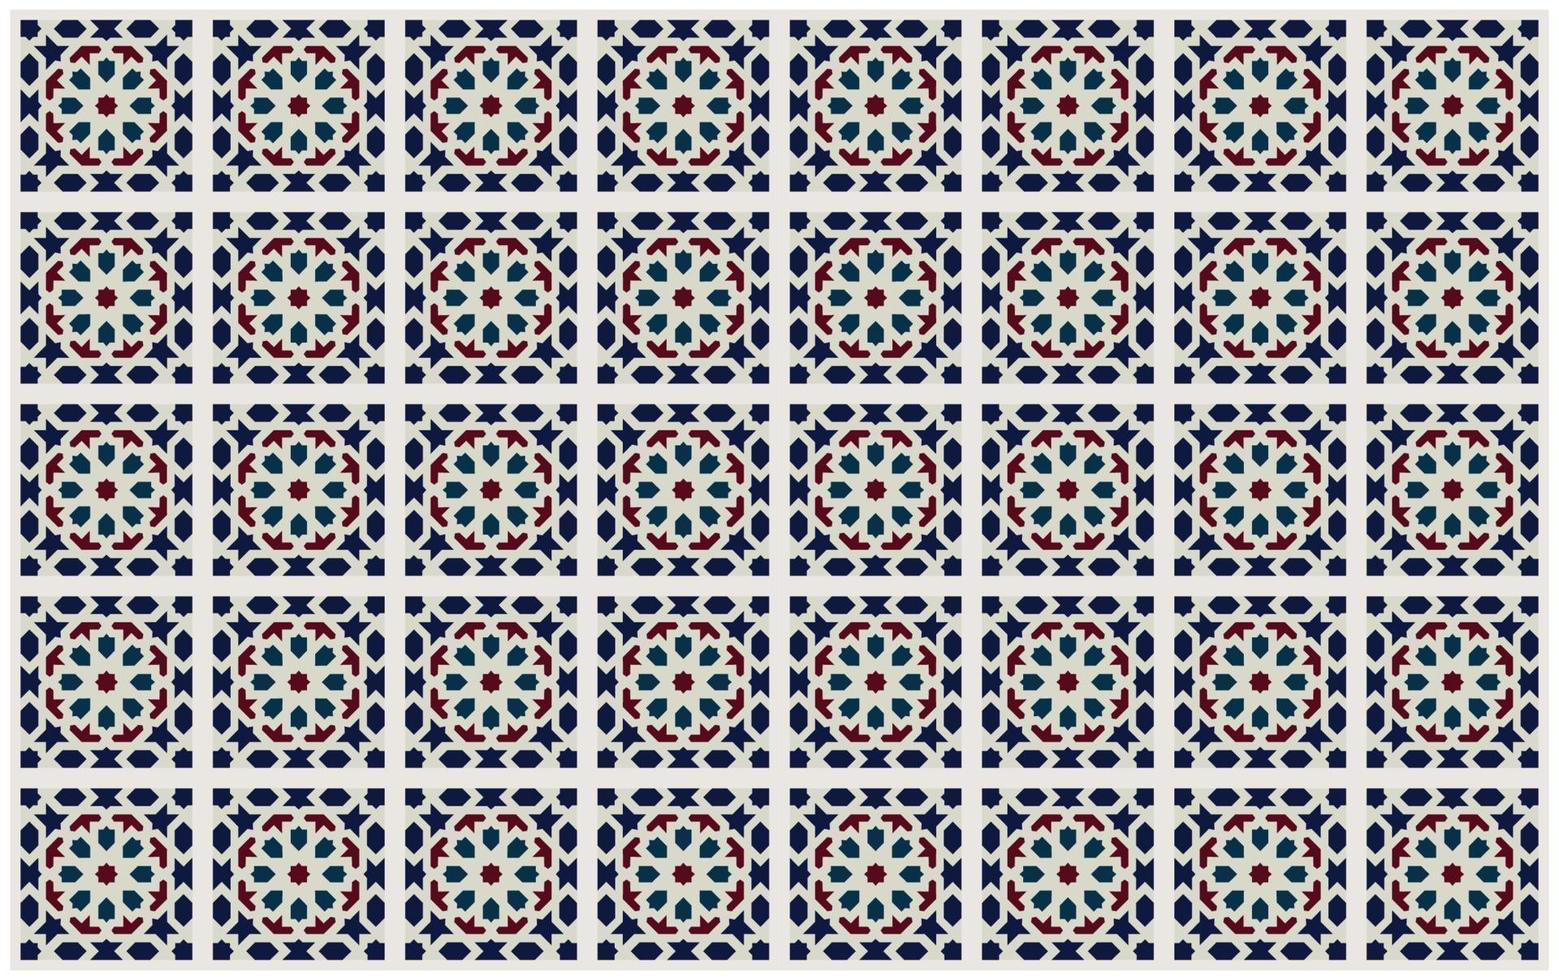 Isometric Colorful Moroccan Tile, Mosaic Seamless Pattern Background. vector